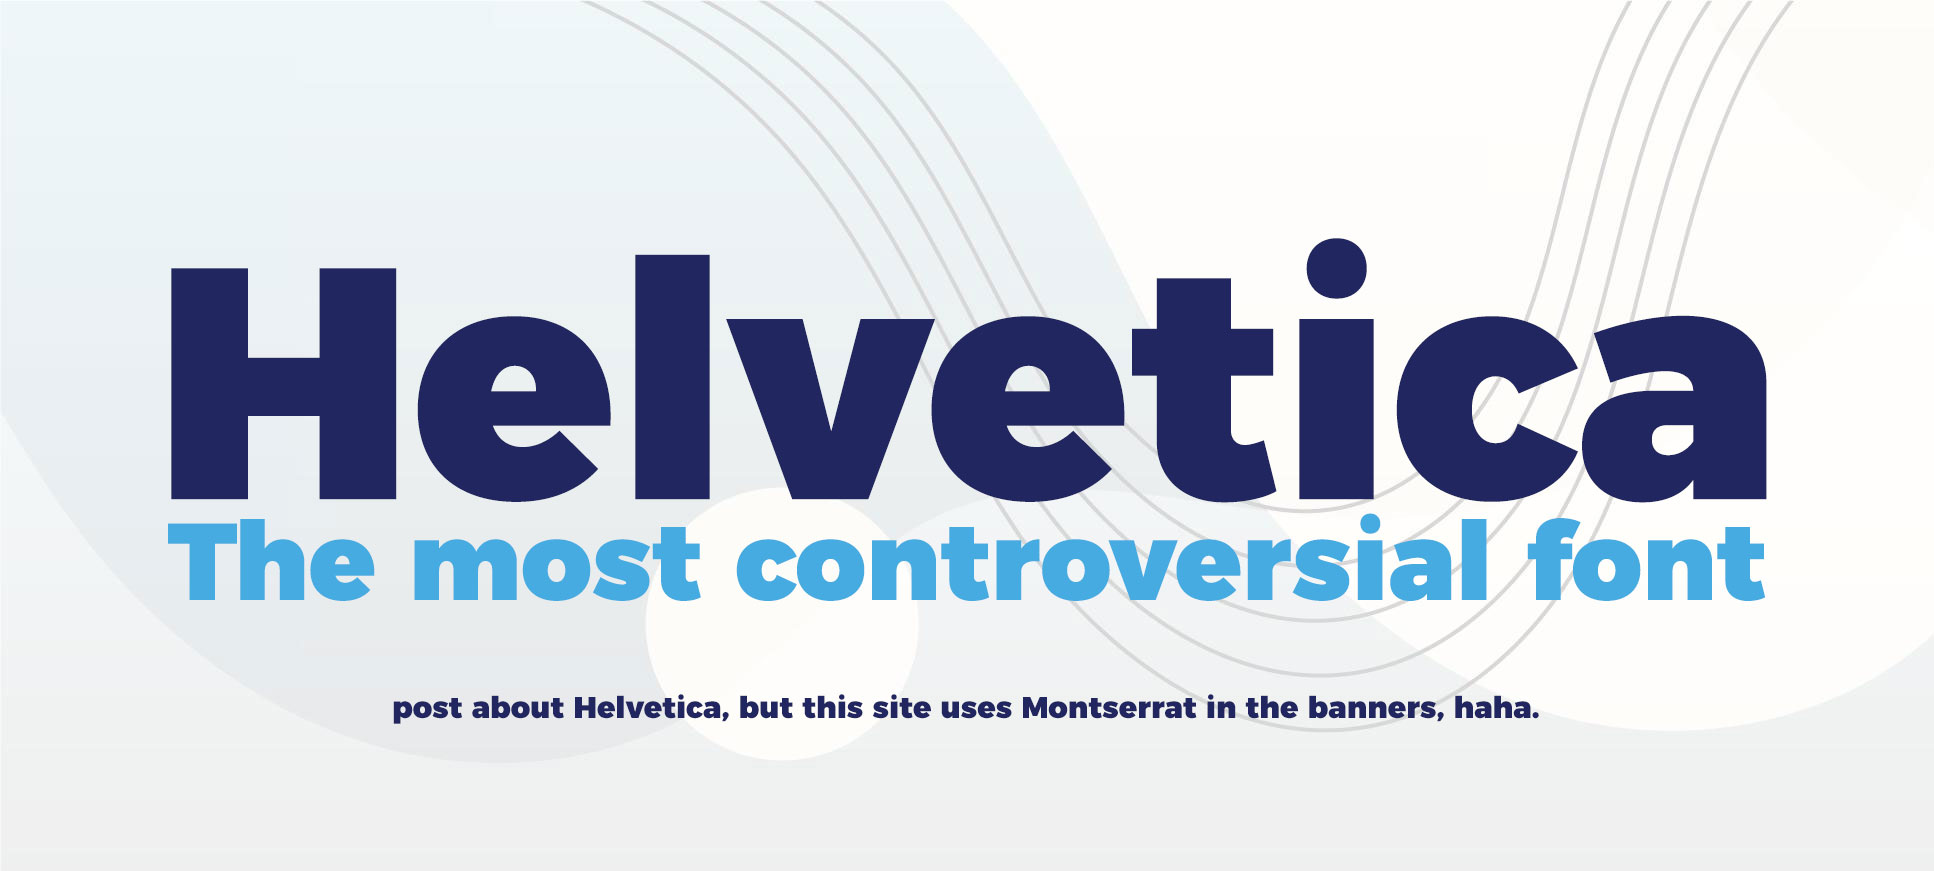 Helvetica - The most controversial font